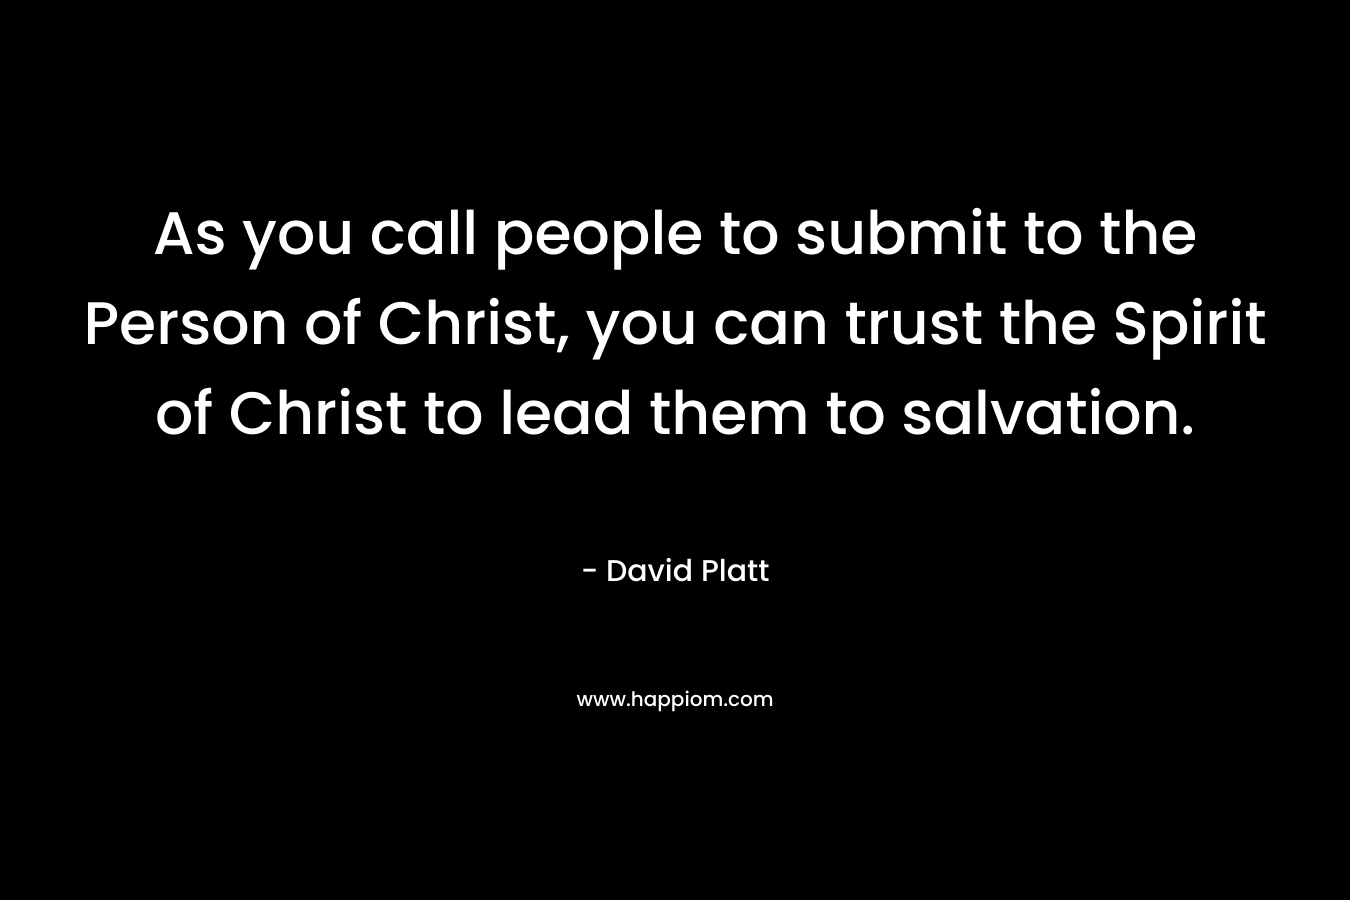 As you call people to submit to the Person of Christ, you can trust the Spirit of Christ to lead them to salvation.